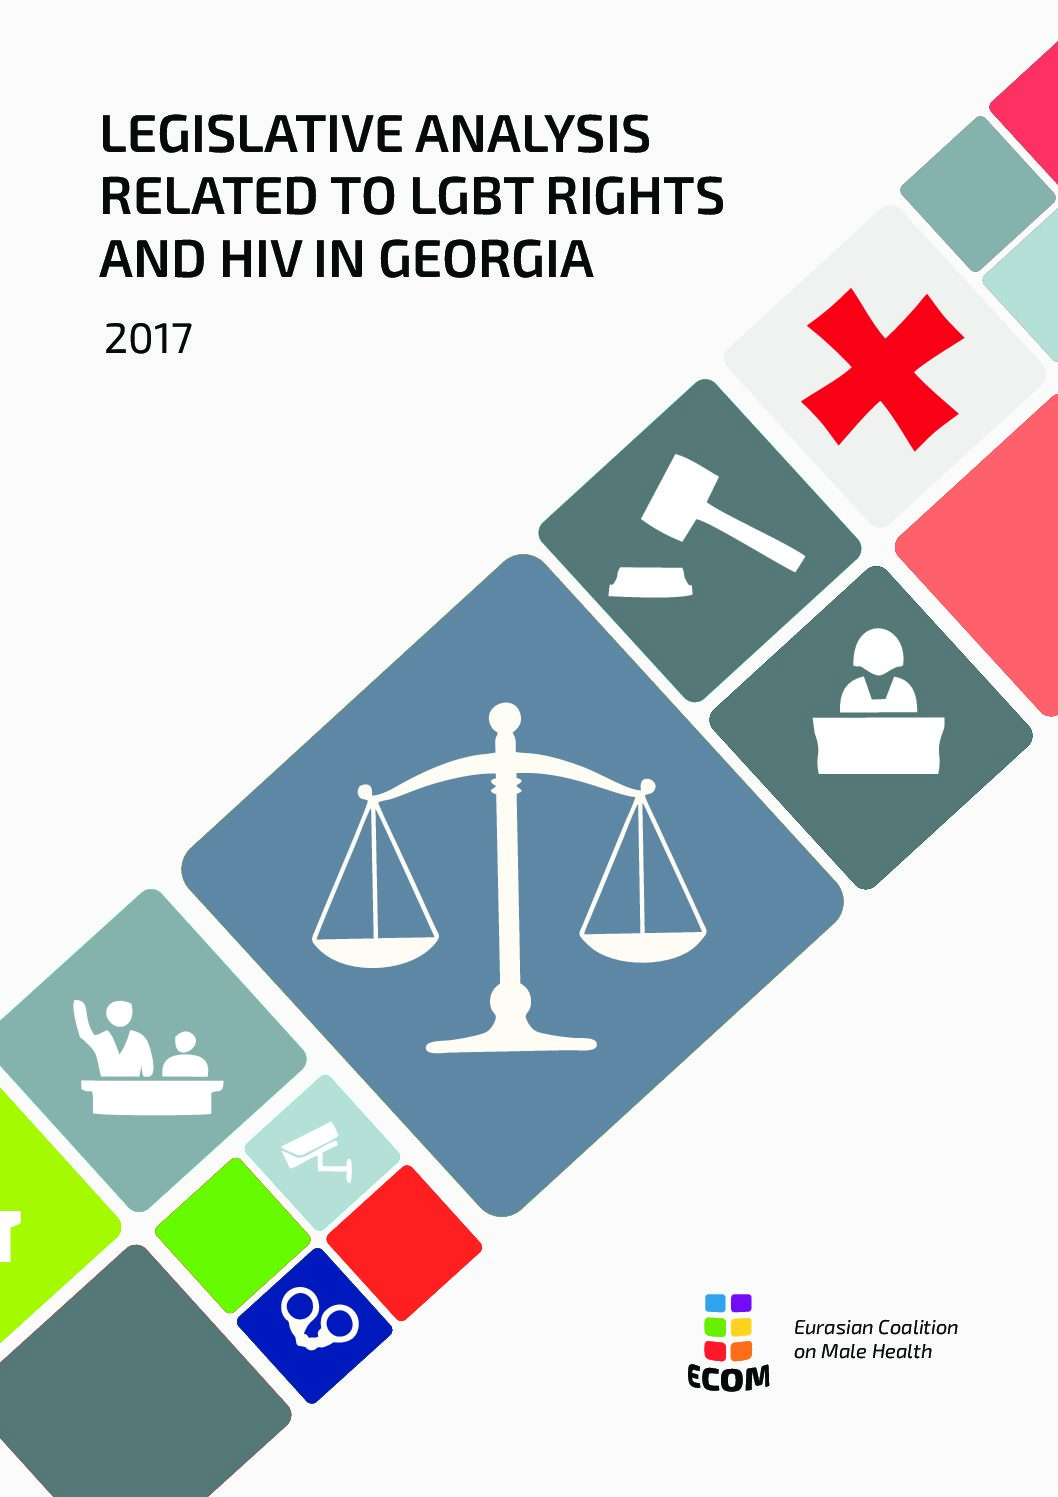 ECOM: Georgia has taken important steps to protect the rights of LGBT, but HIV legislation has to be improved